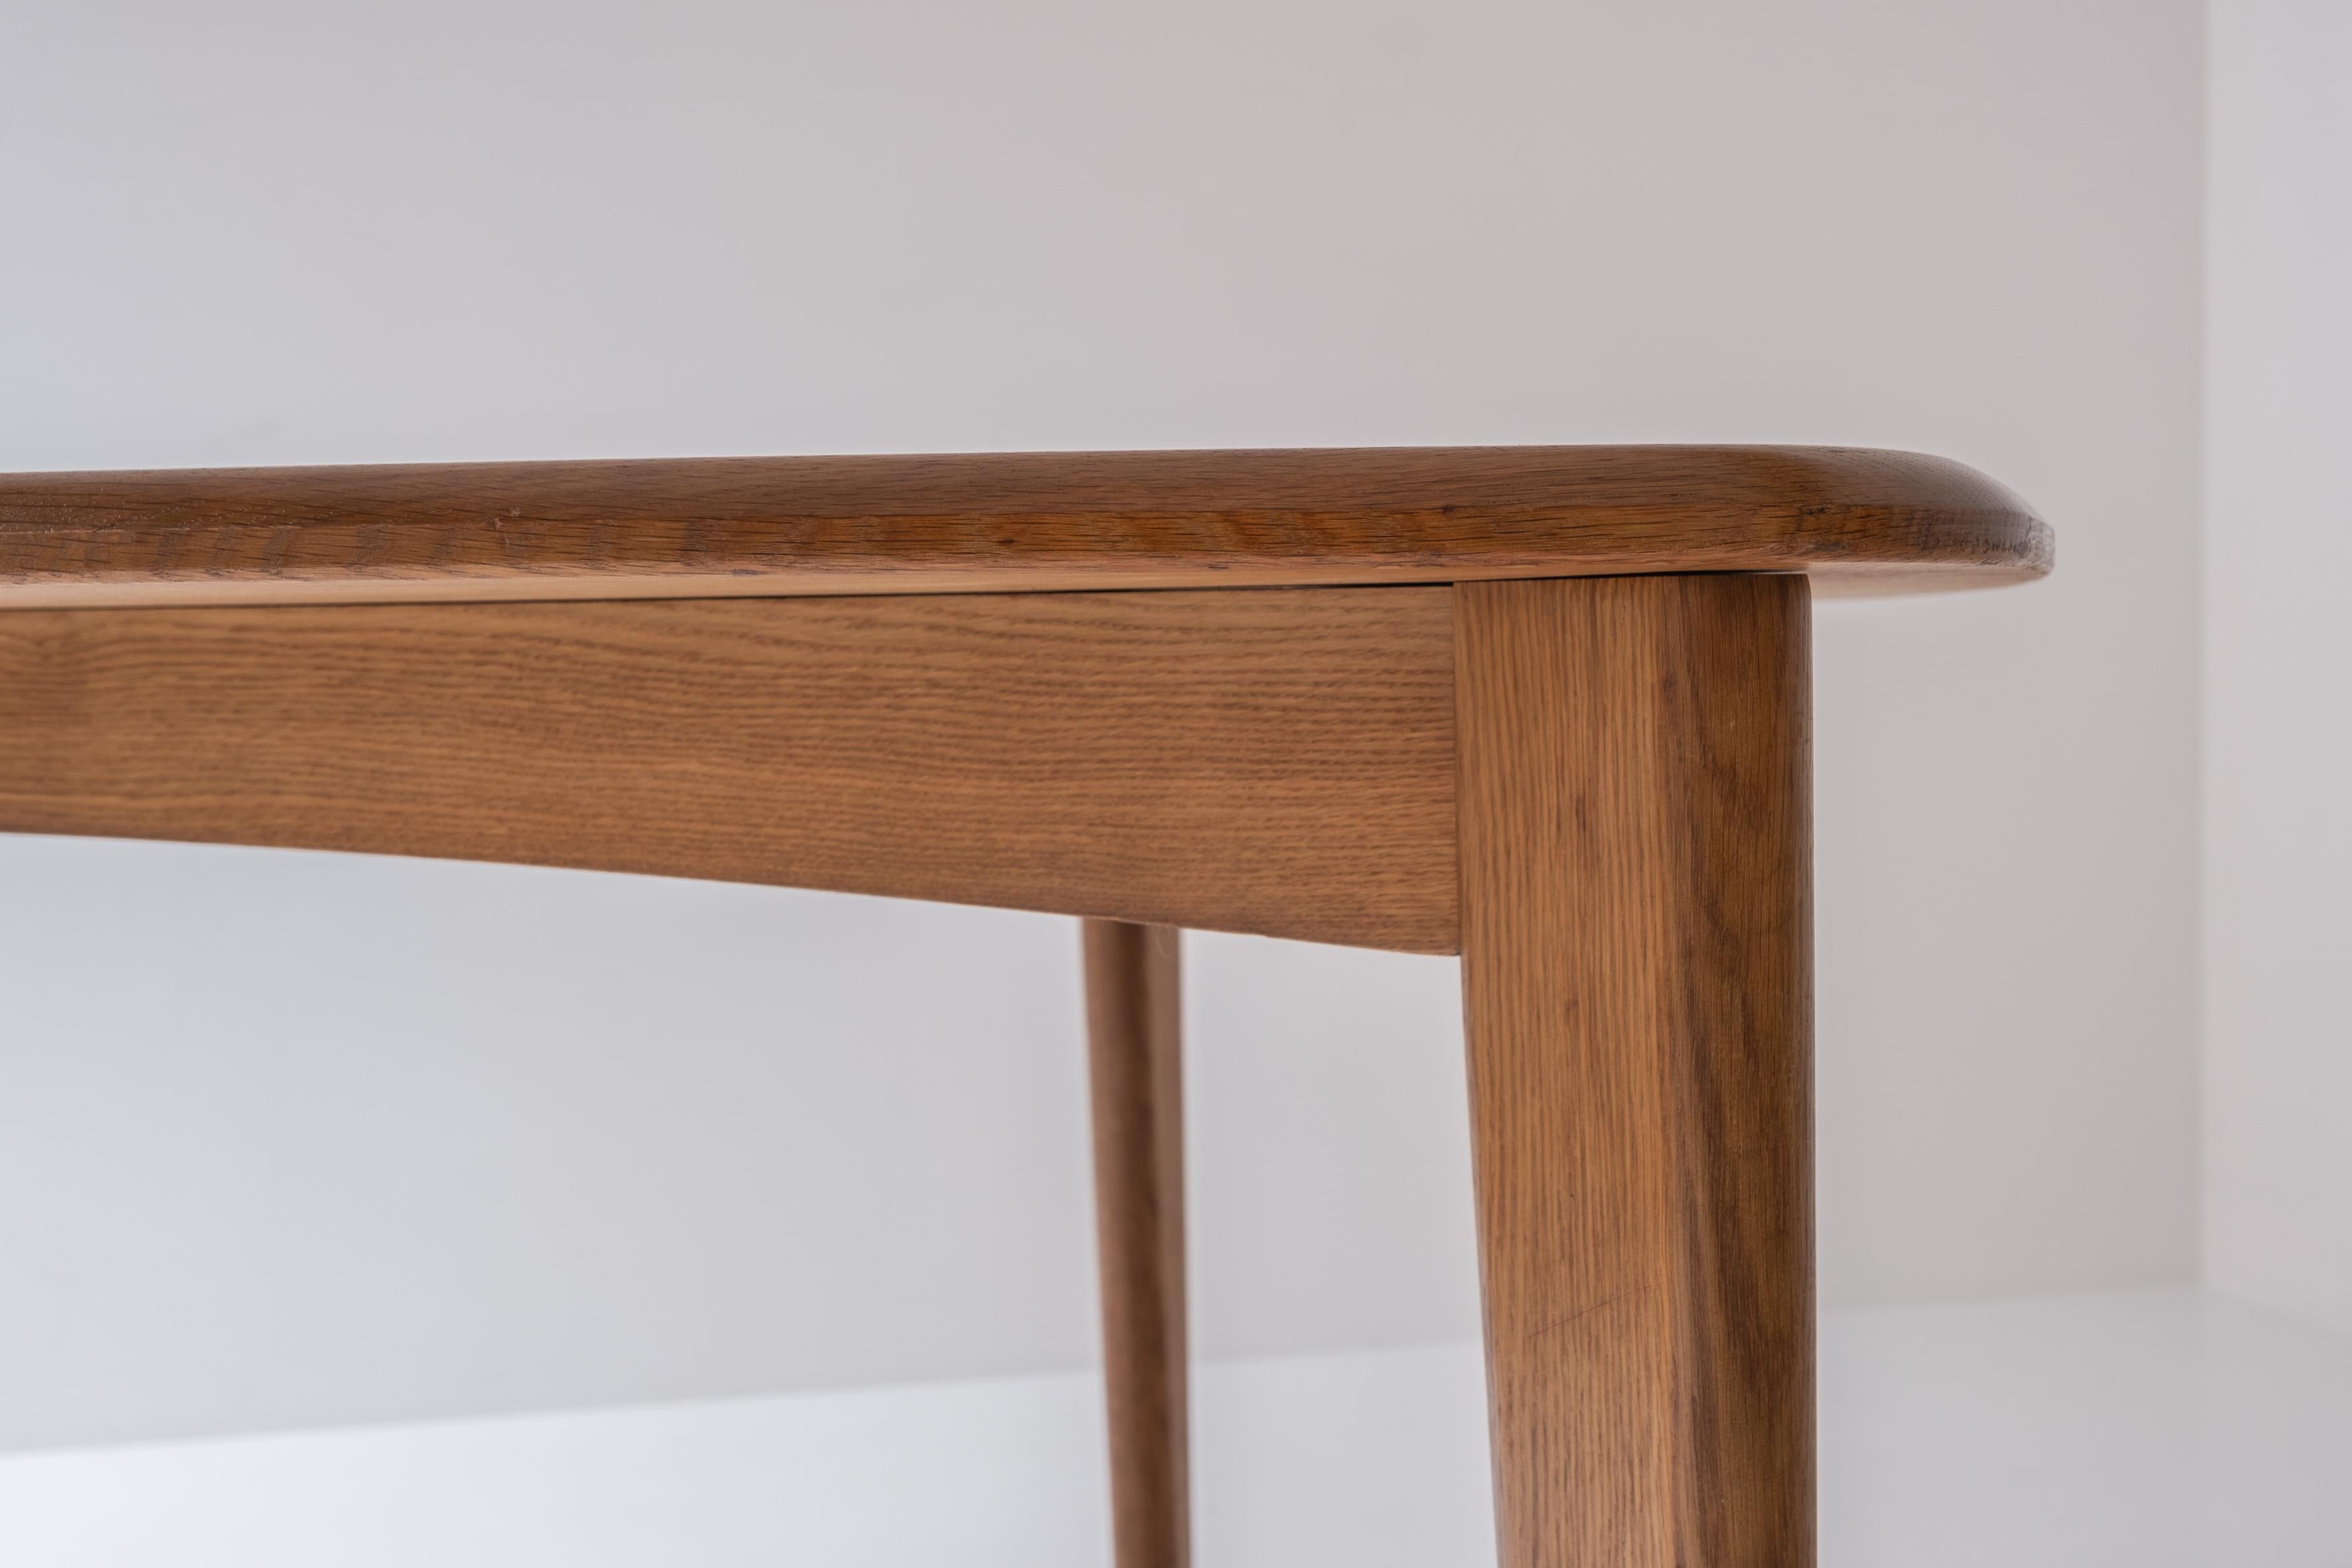 Mid-20th Century Solid Oak Triangle Shaped Dining Table from France, Designed in the 1960s